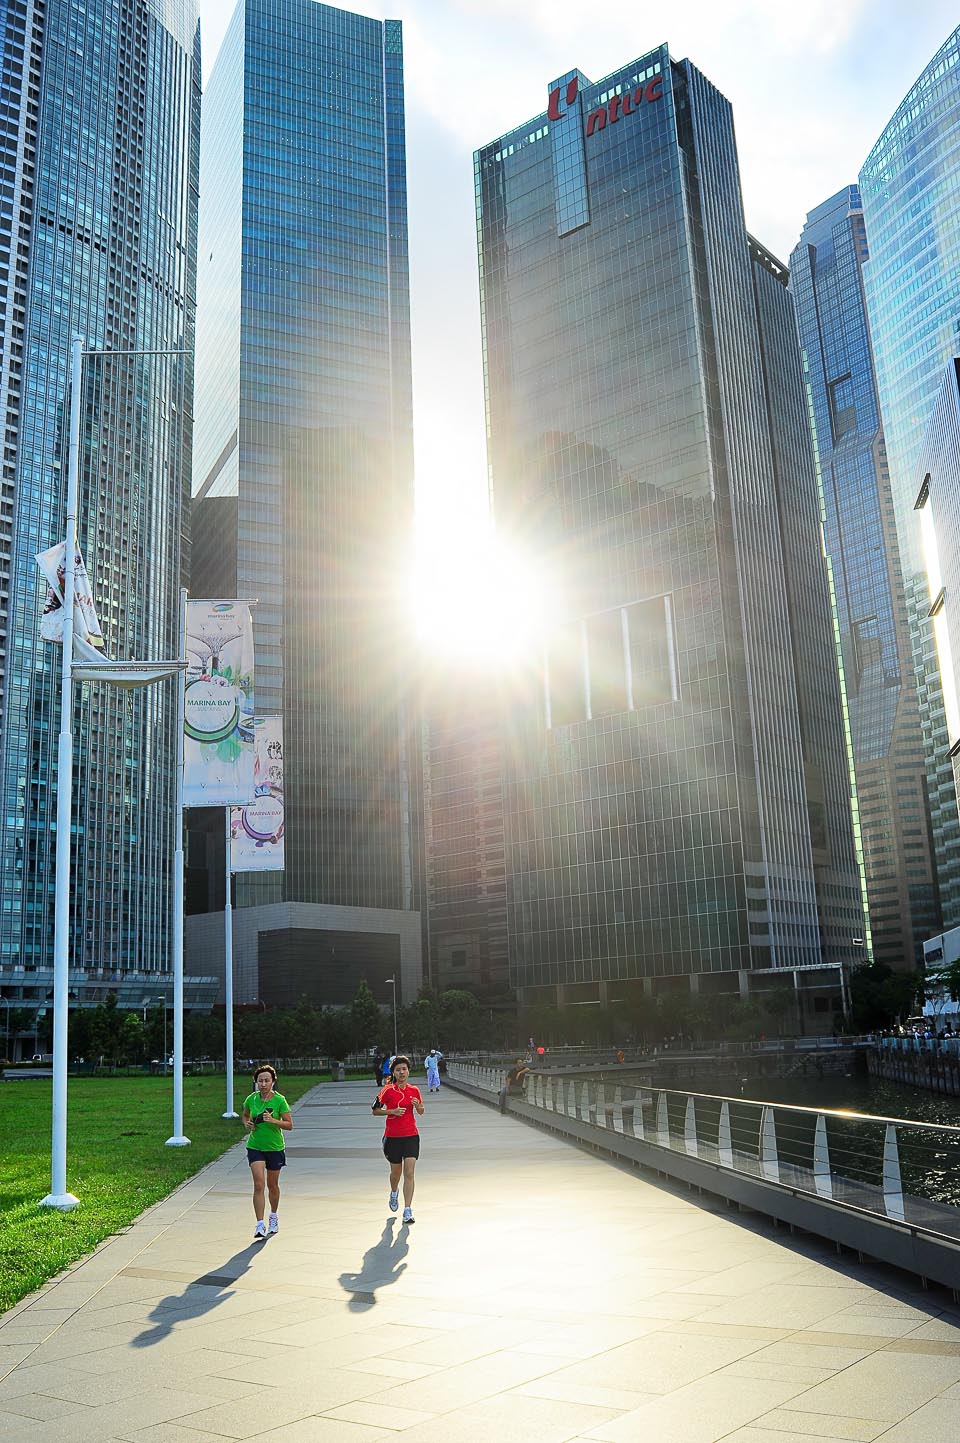 Ultraviolet Radiation in Singapore Hit “Extreme” Level, Runners Should Take Precautions When Running in the Afternoon